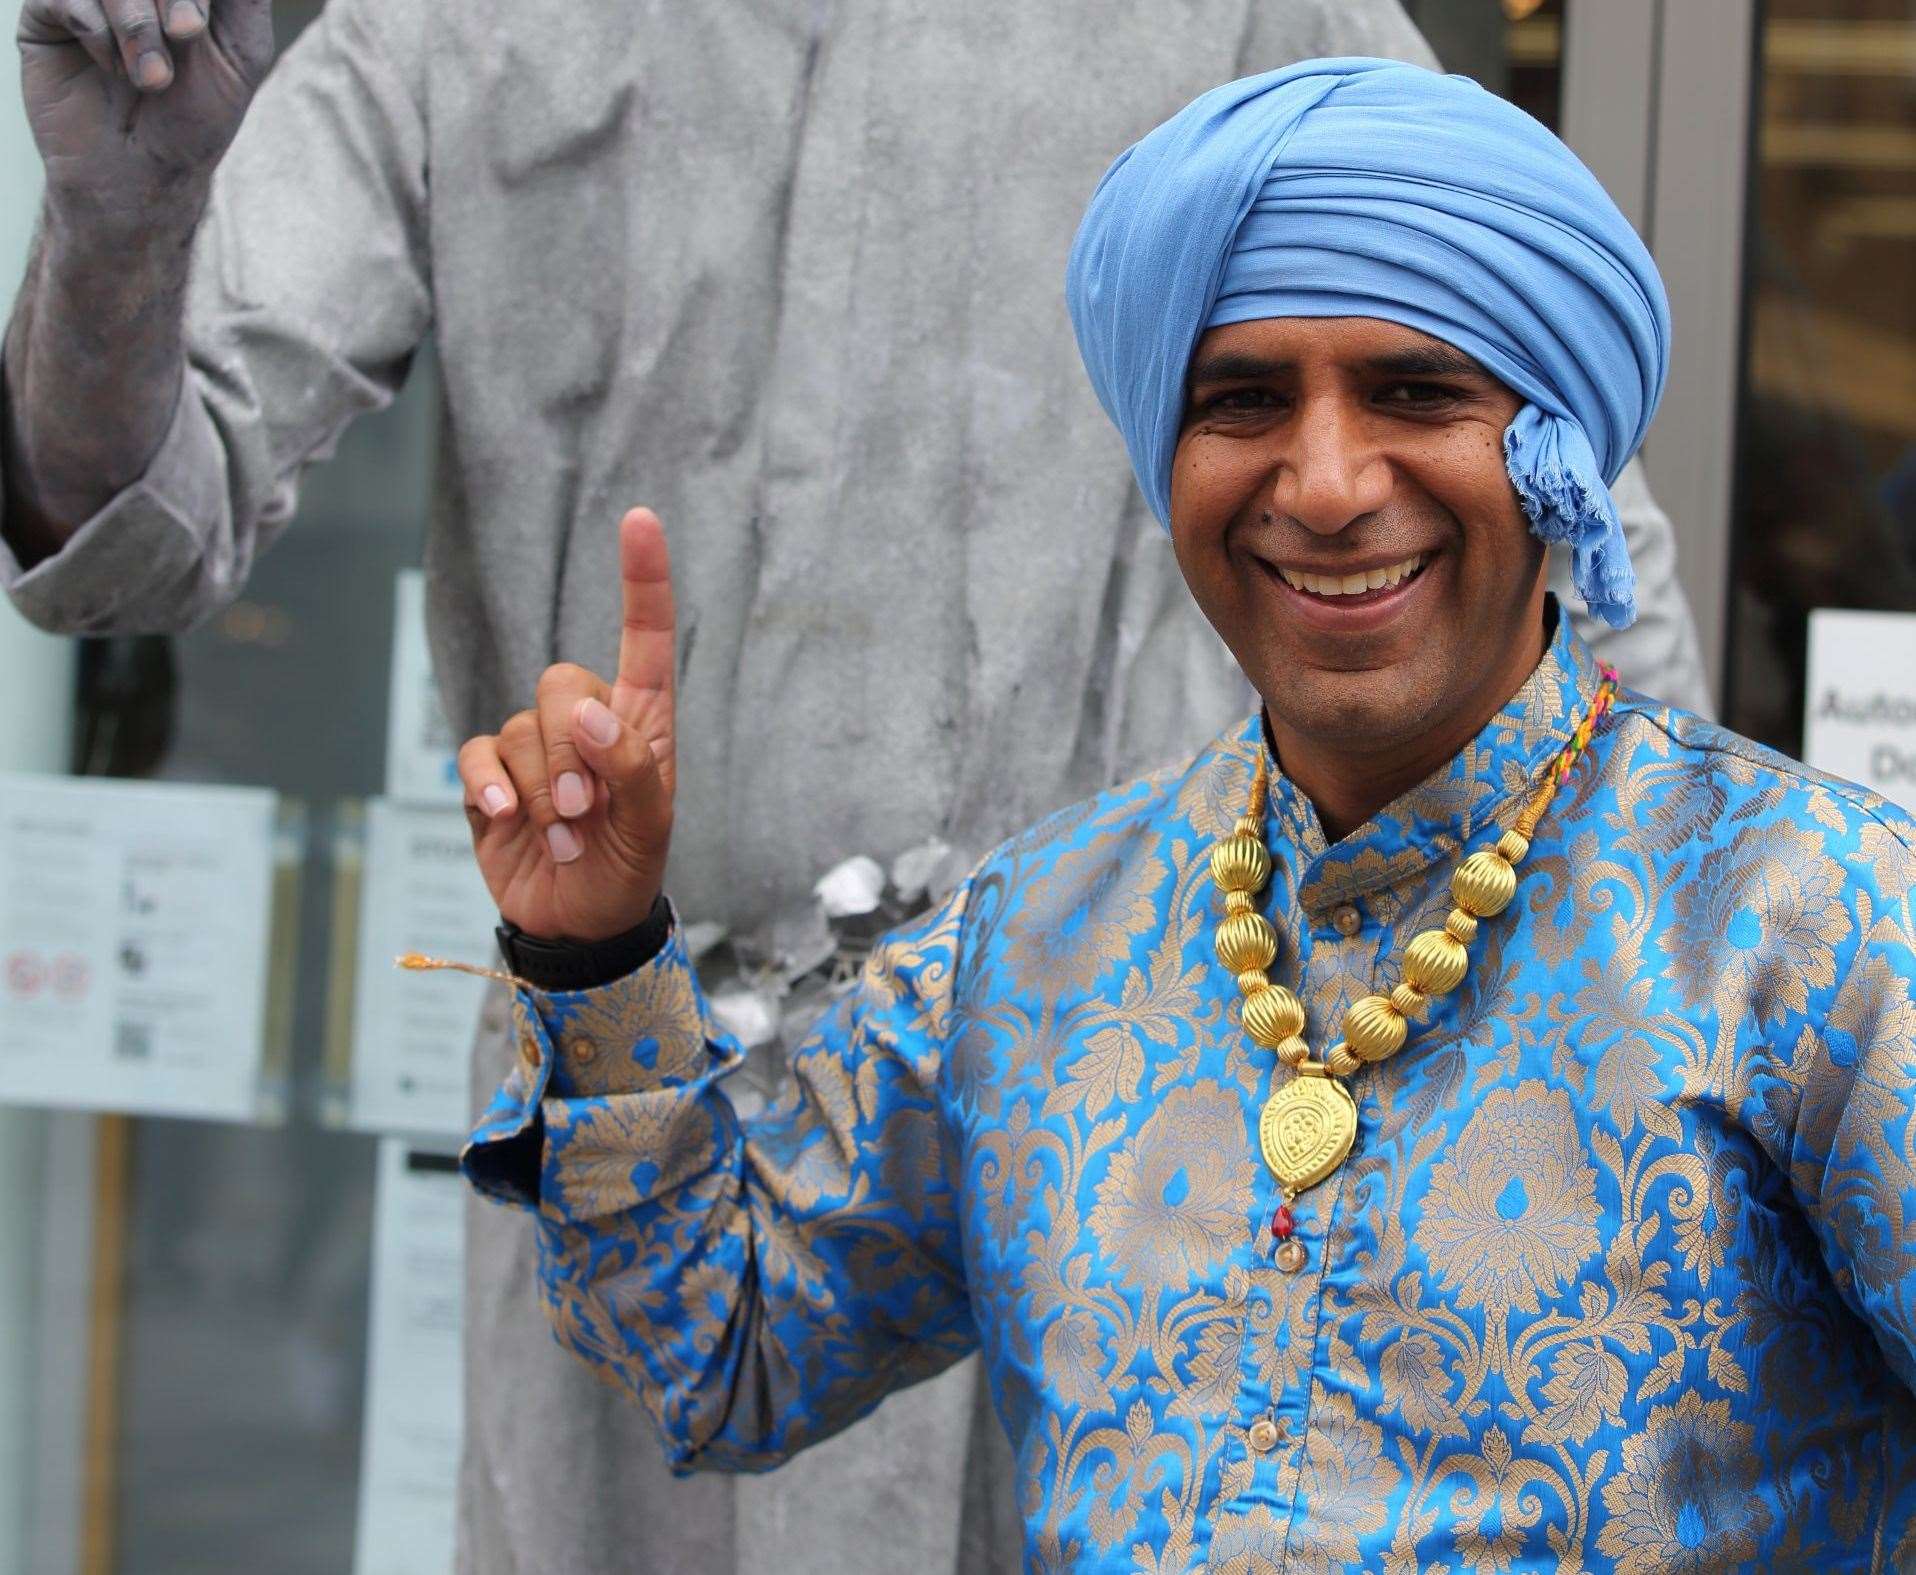 Gurvinder Sandher, artistic director at Cohesion Plus, at Maidstone's Fusion Street Festival in 2021